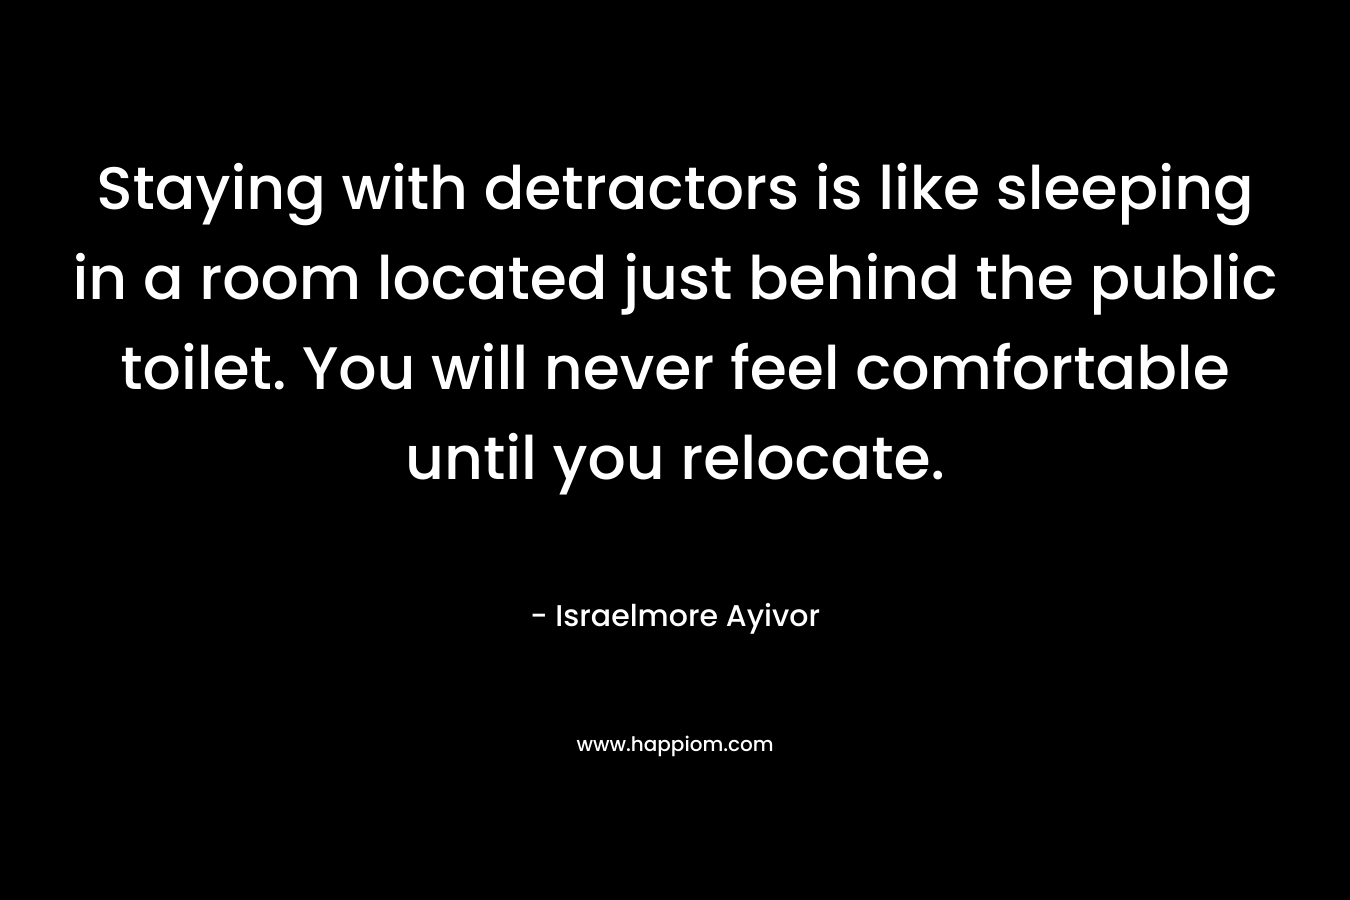 Staying with detractors is like sleeping in a room located just behind the public toilet. You will never feel comfortable until you relocate. – Israelmore Ayivor